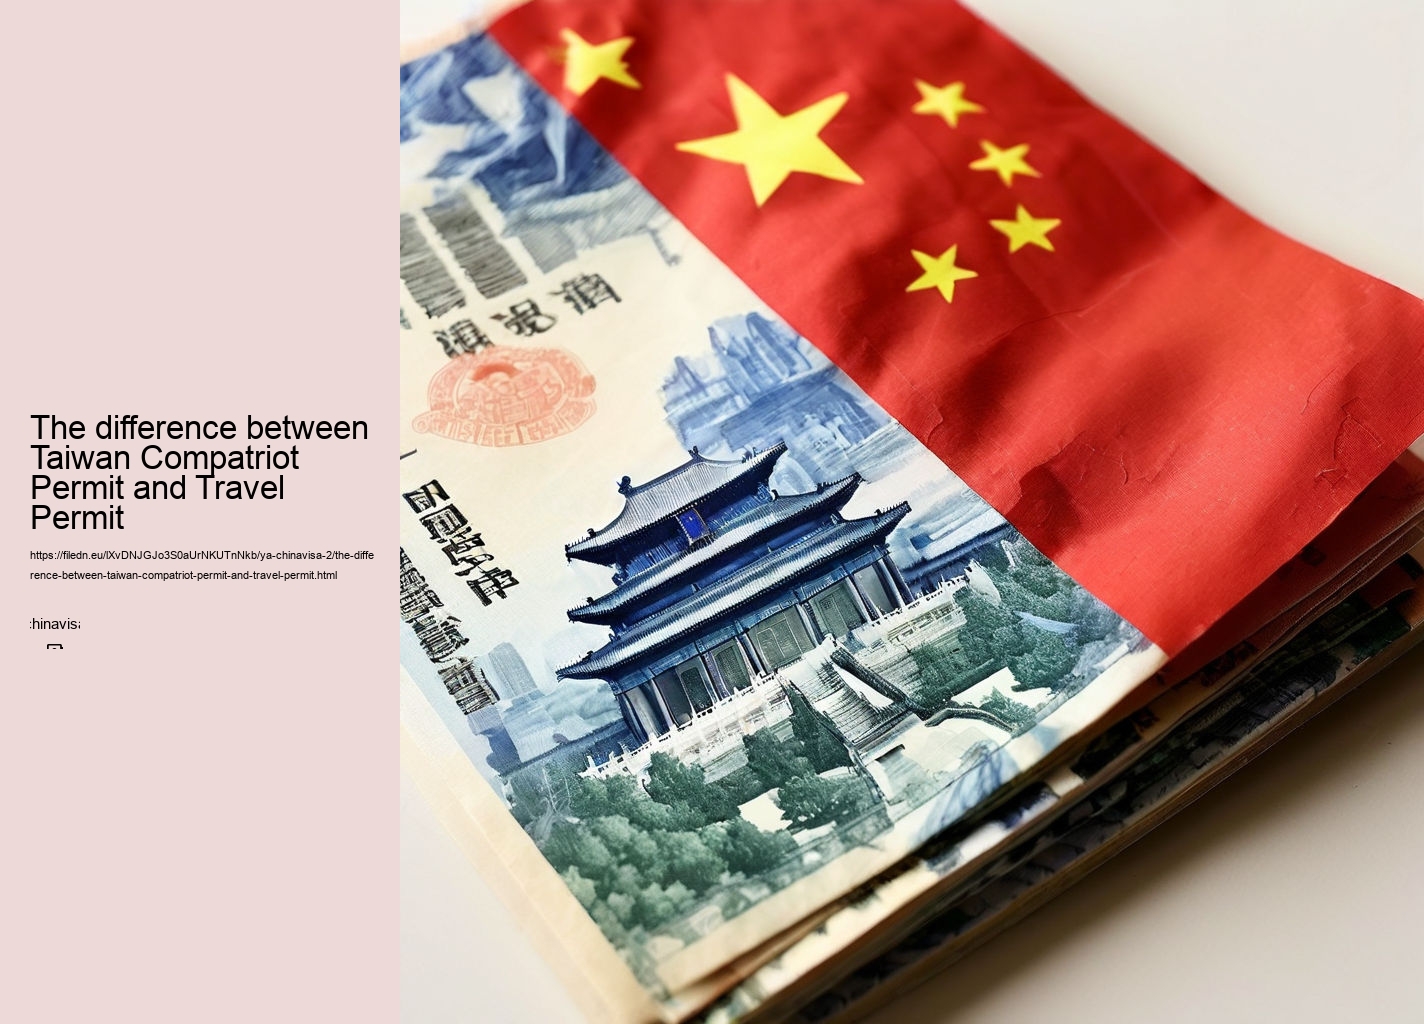 The difference between Taiwan Compatriot Permit and Travel Permit